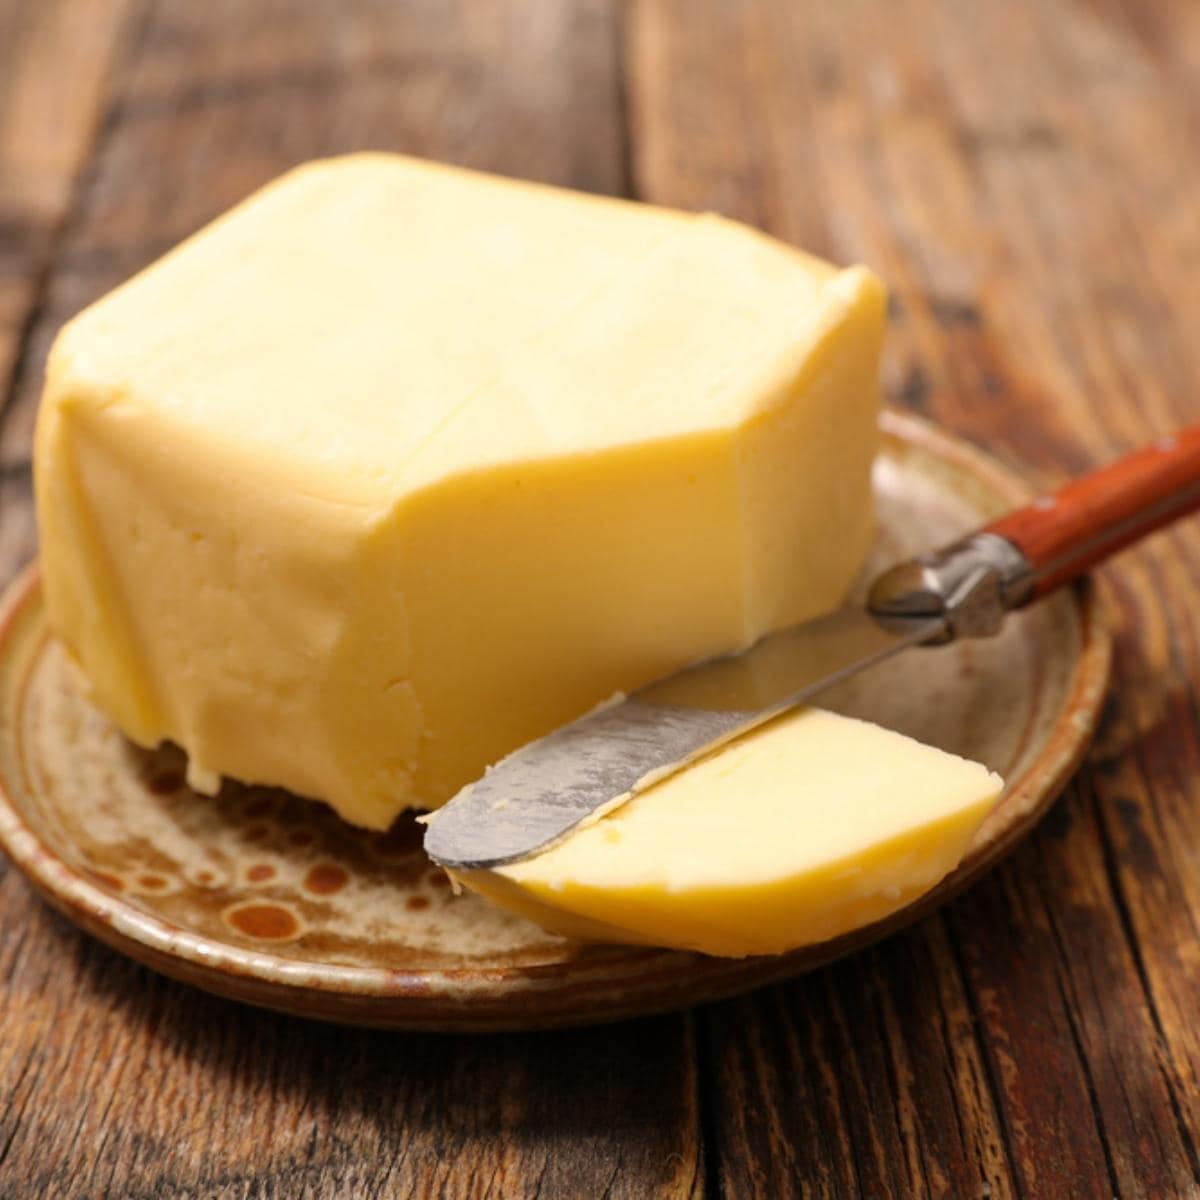 Cube of Butter on a Wooden Plate
